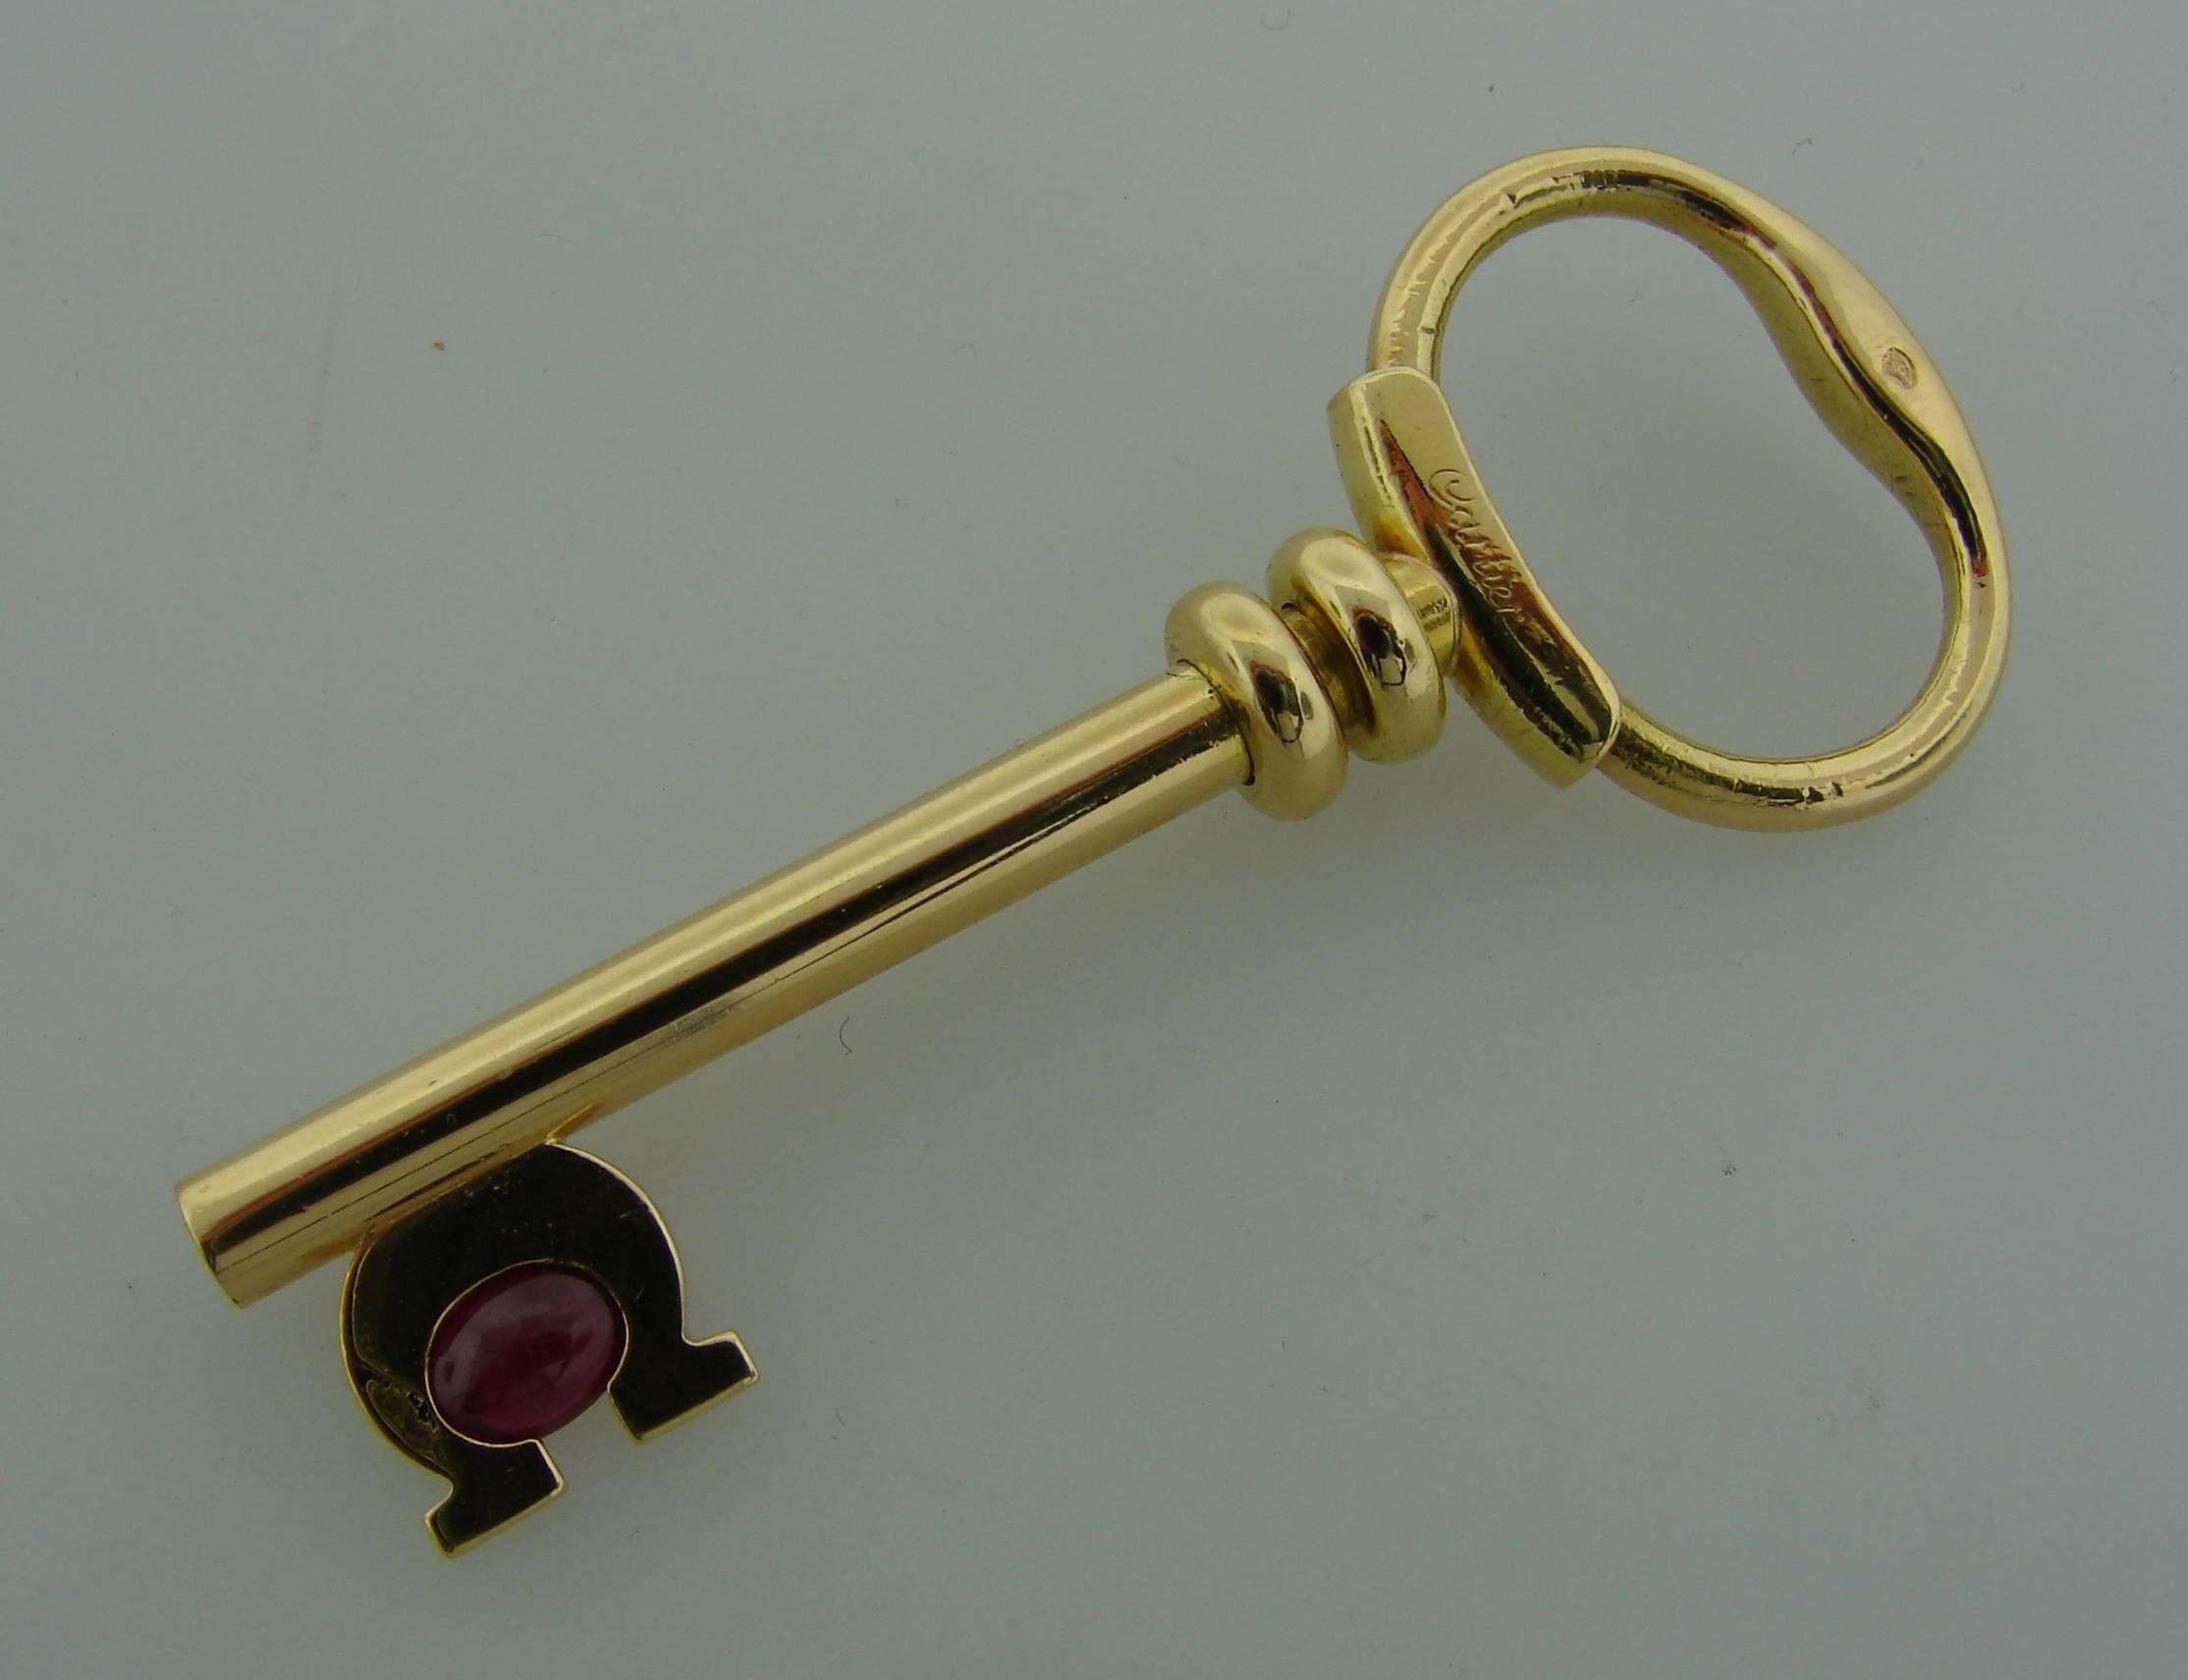 Cute and wearable key pendant created by Cartier in France in the 1970's. Made of 18k yellow gold and set with an oval cabochon ruby (5.57 x 4.37 x 2.31 mm, 0.50 carat). The pendant is 2-1/4